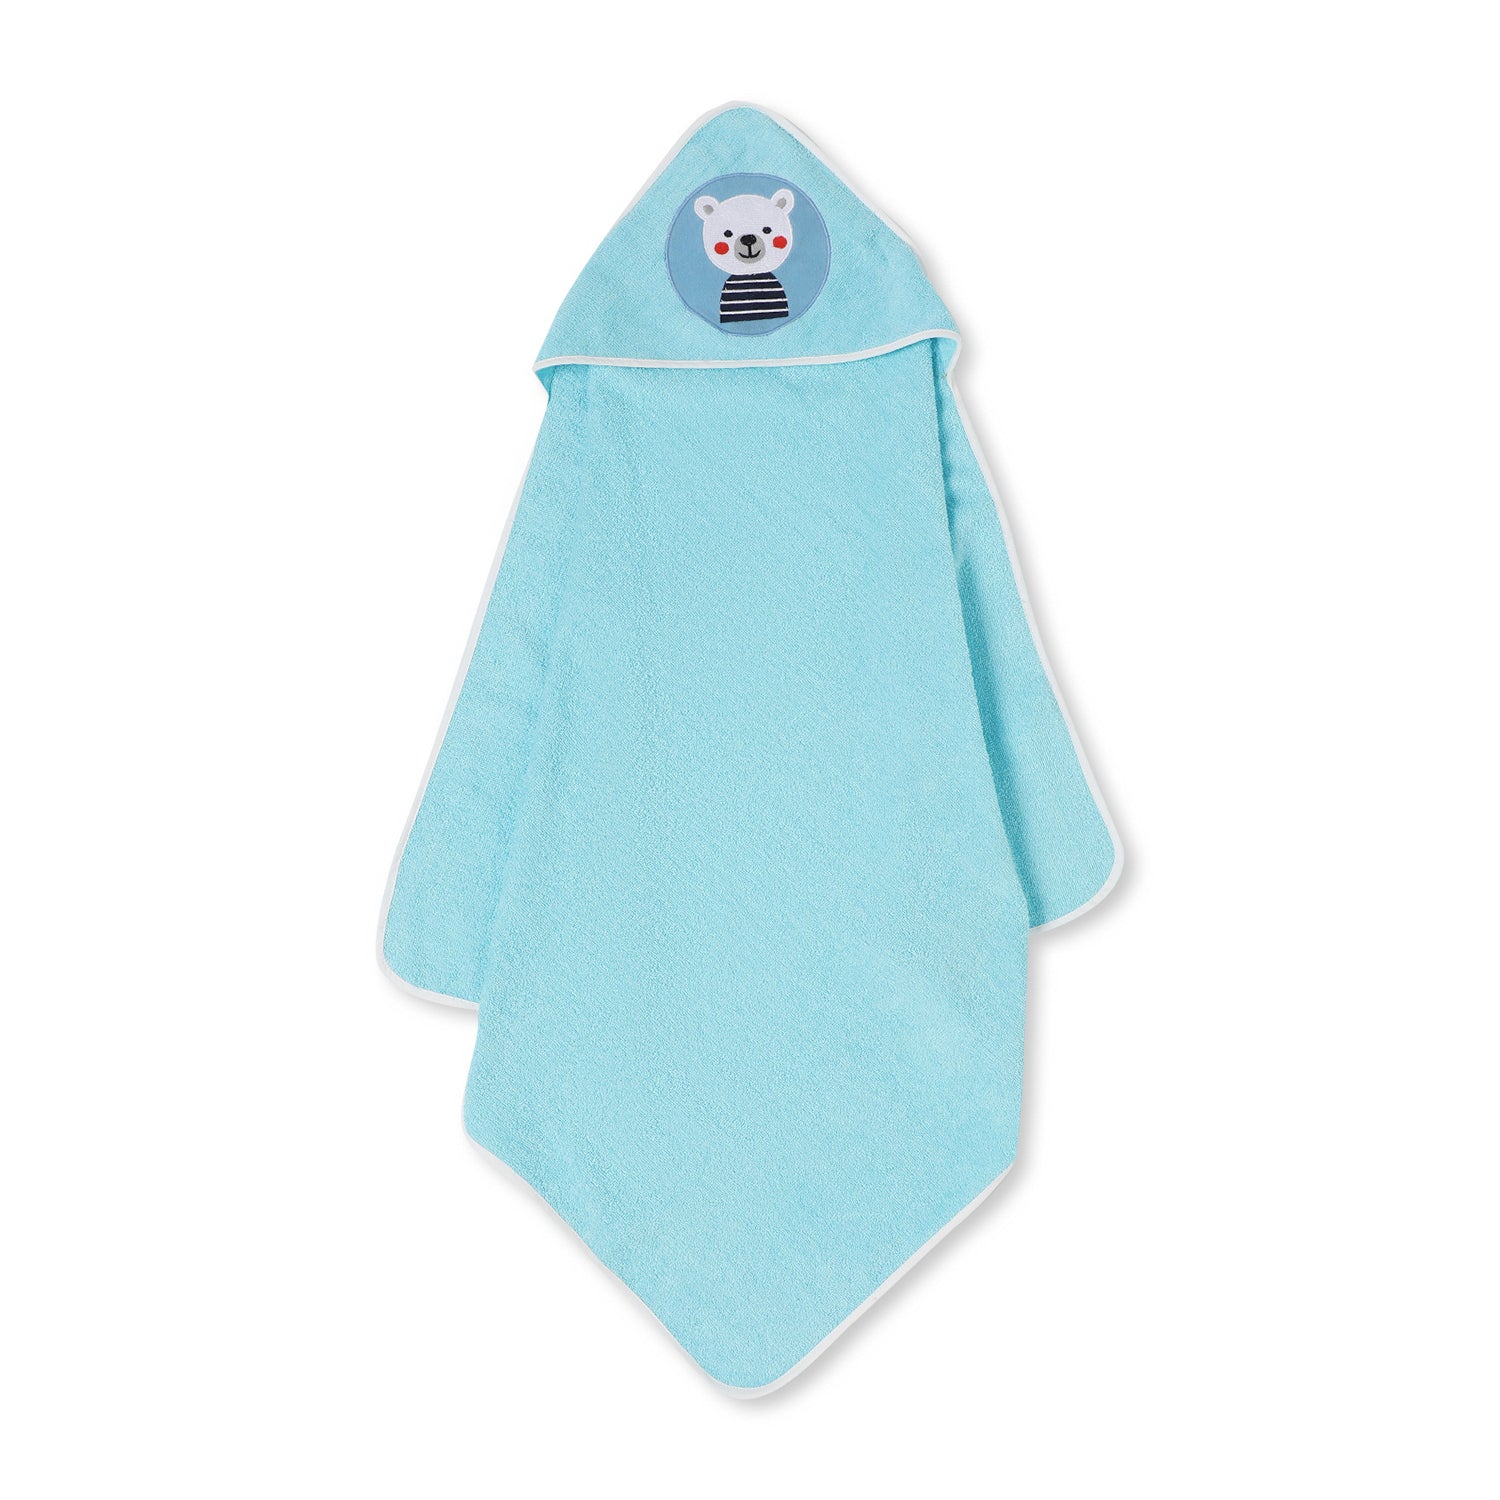 Giggles & Wiggles Beary Cute Hooded Terry Towel For Newborn